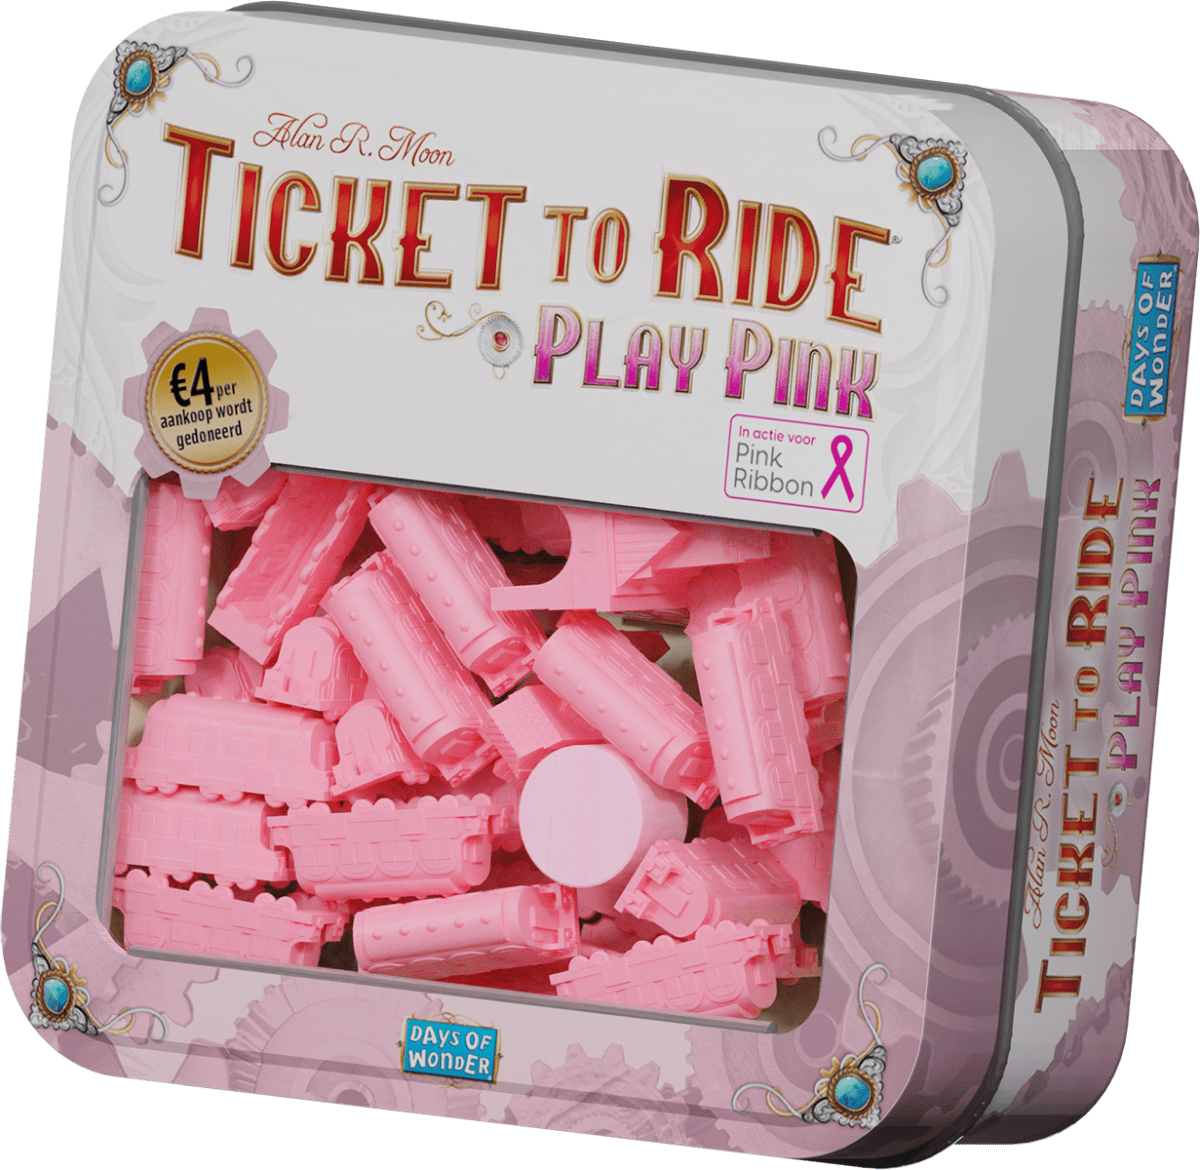 play pink ticket to ride